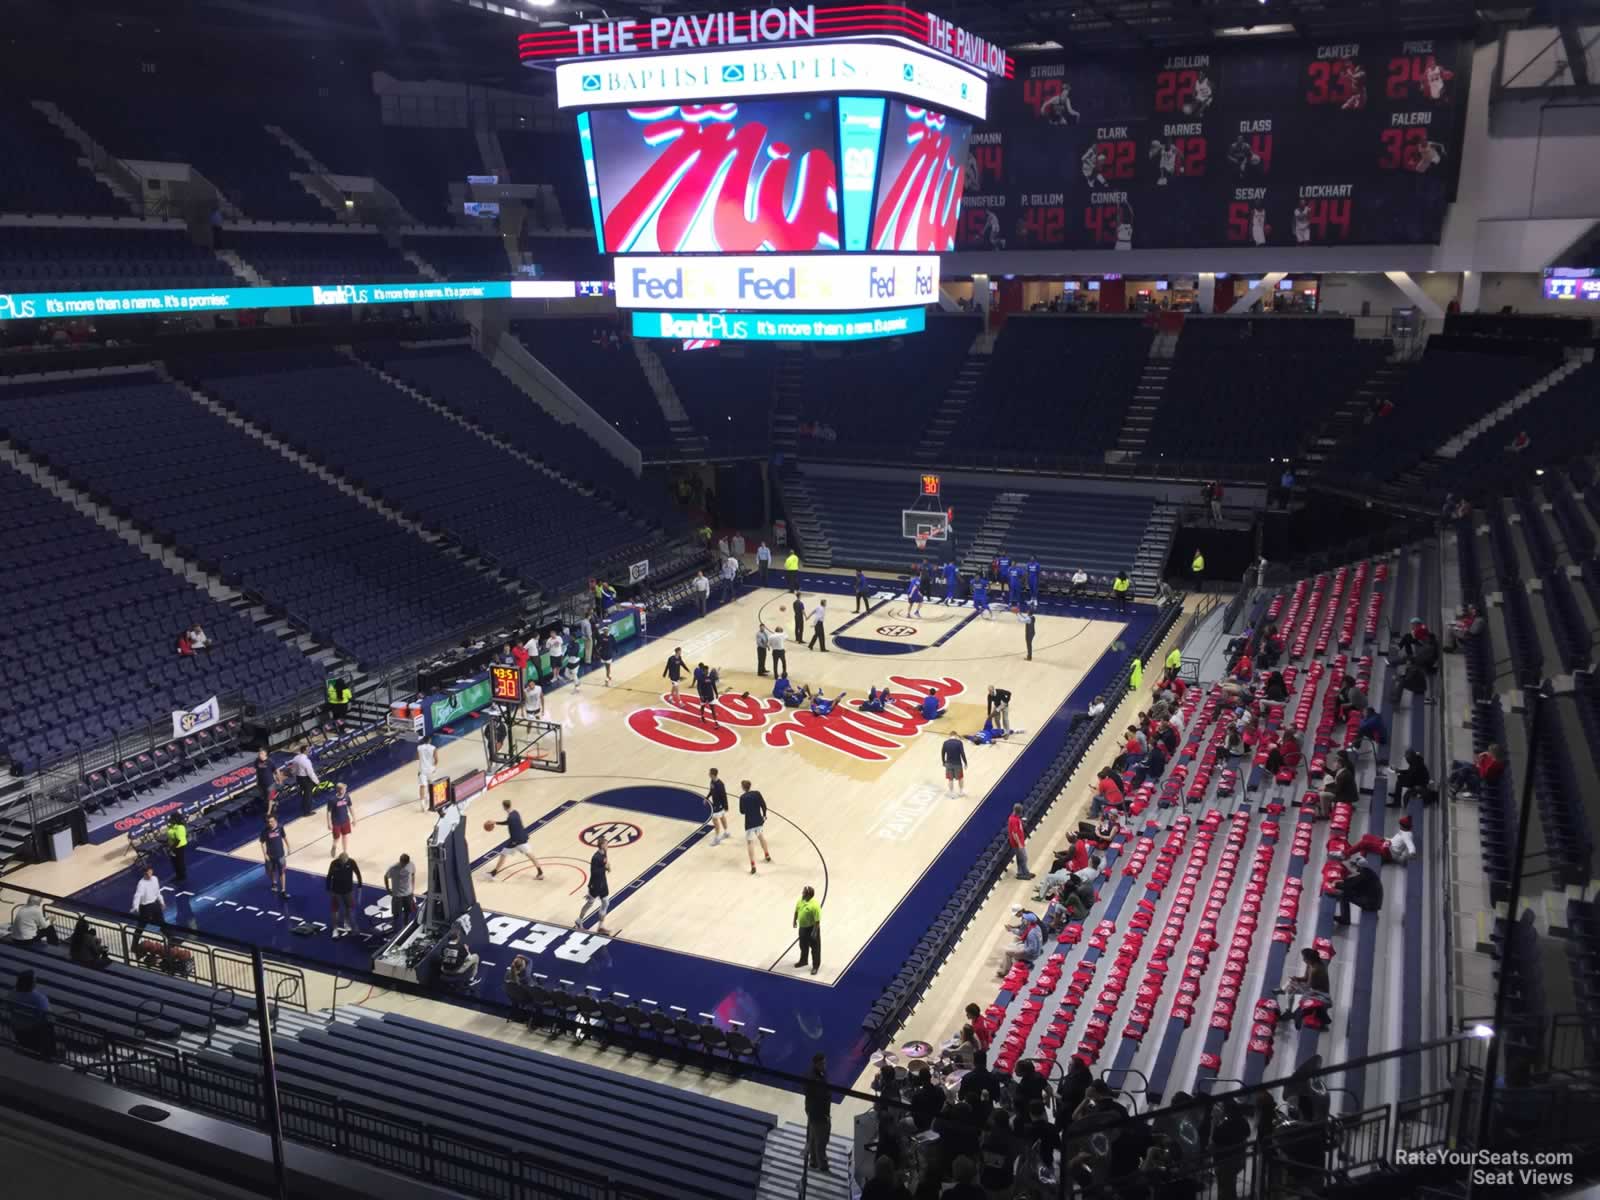 section 208, row 3 seat view  - pavilion at ole miss